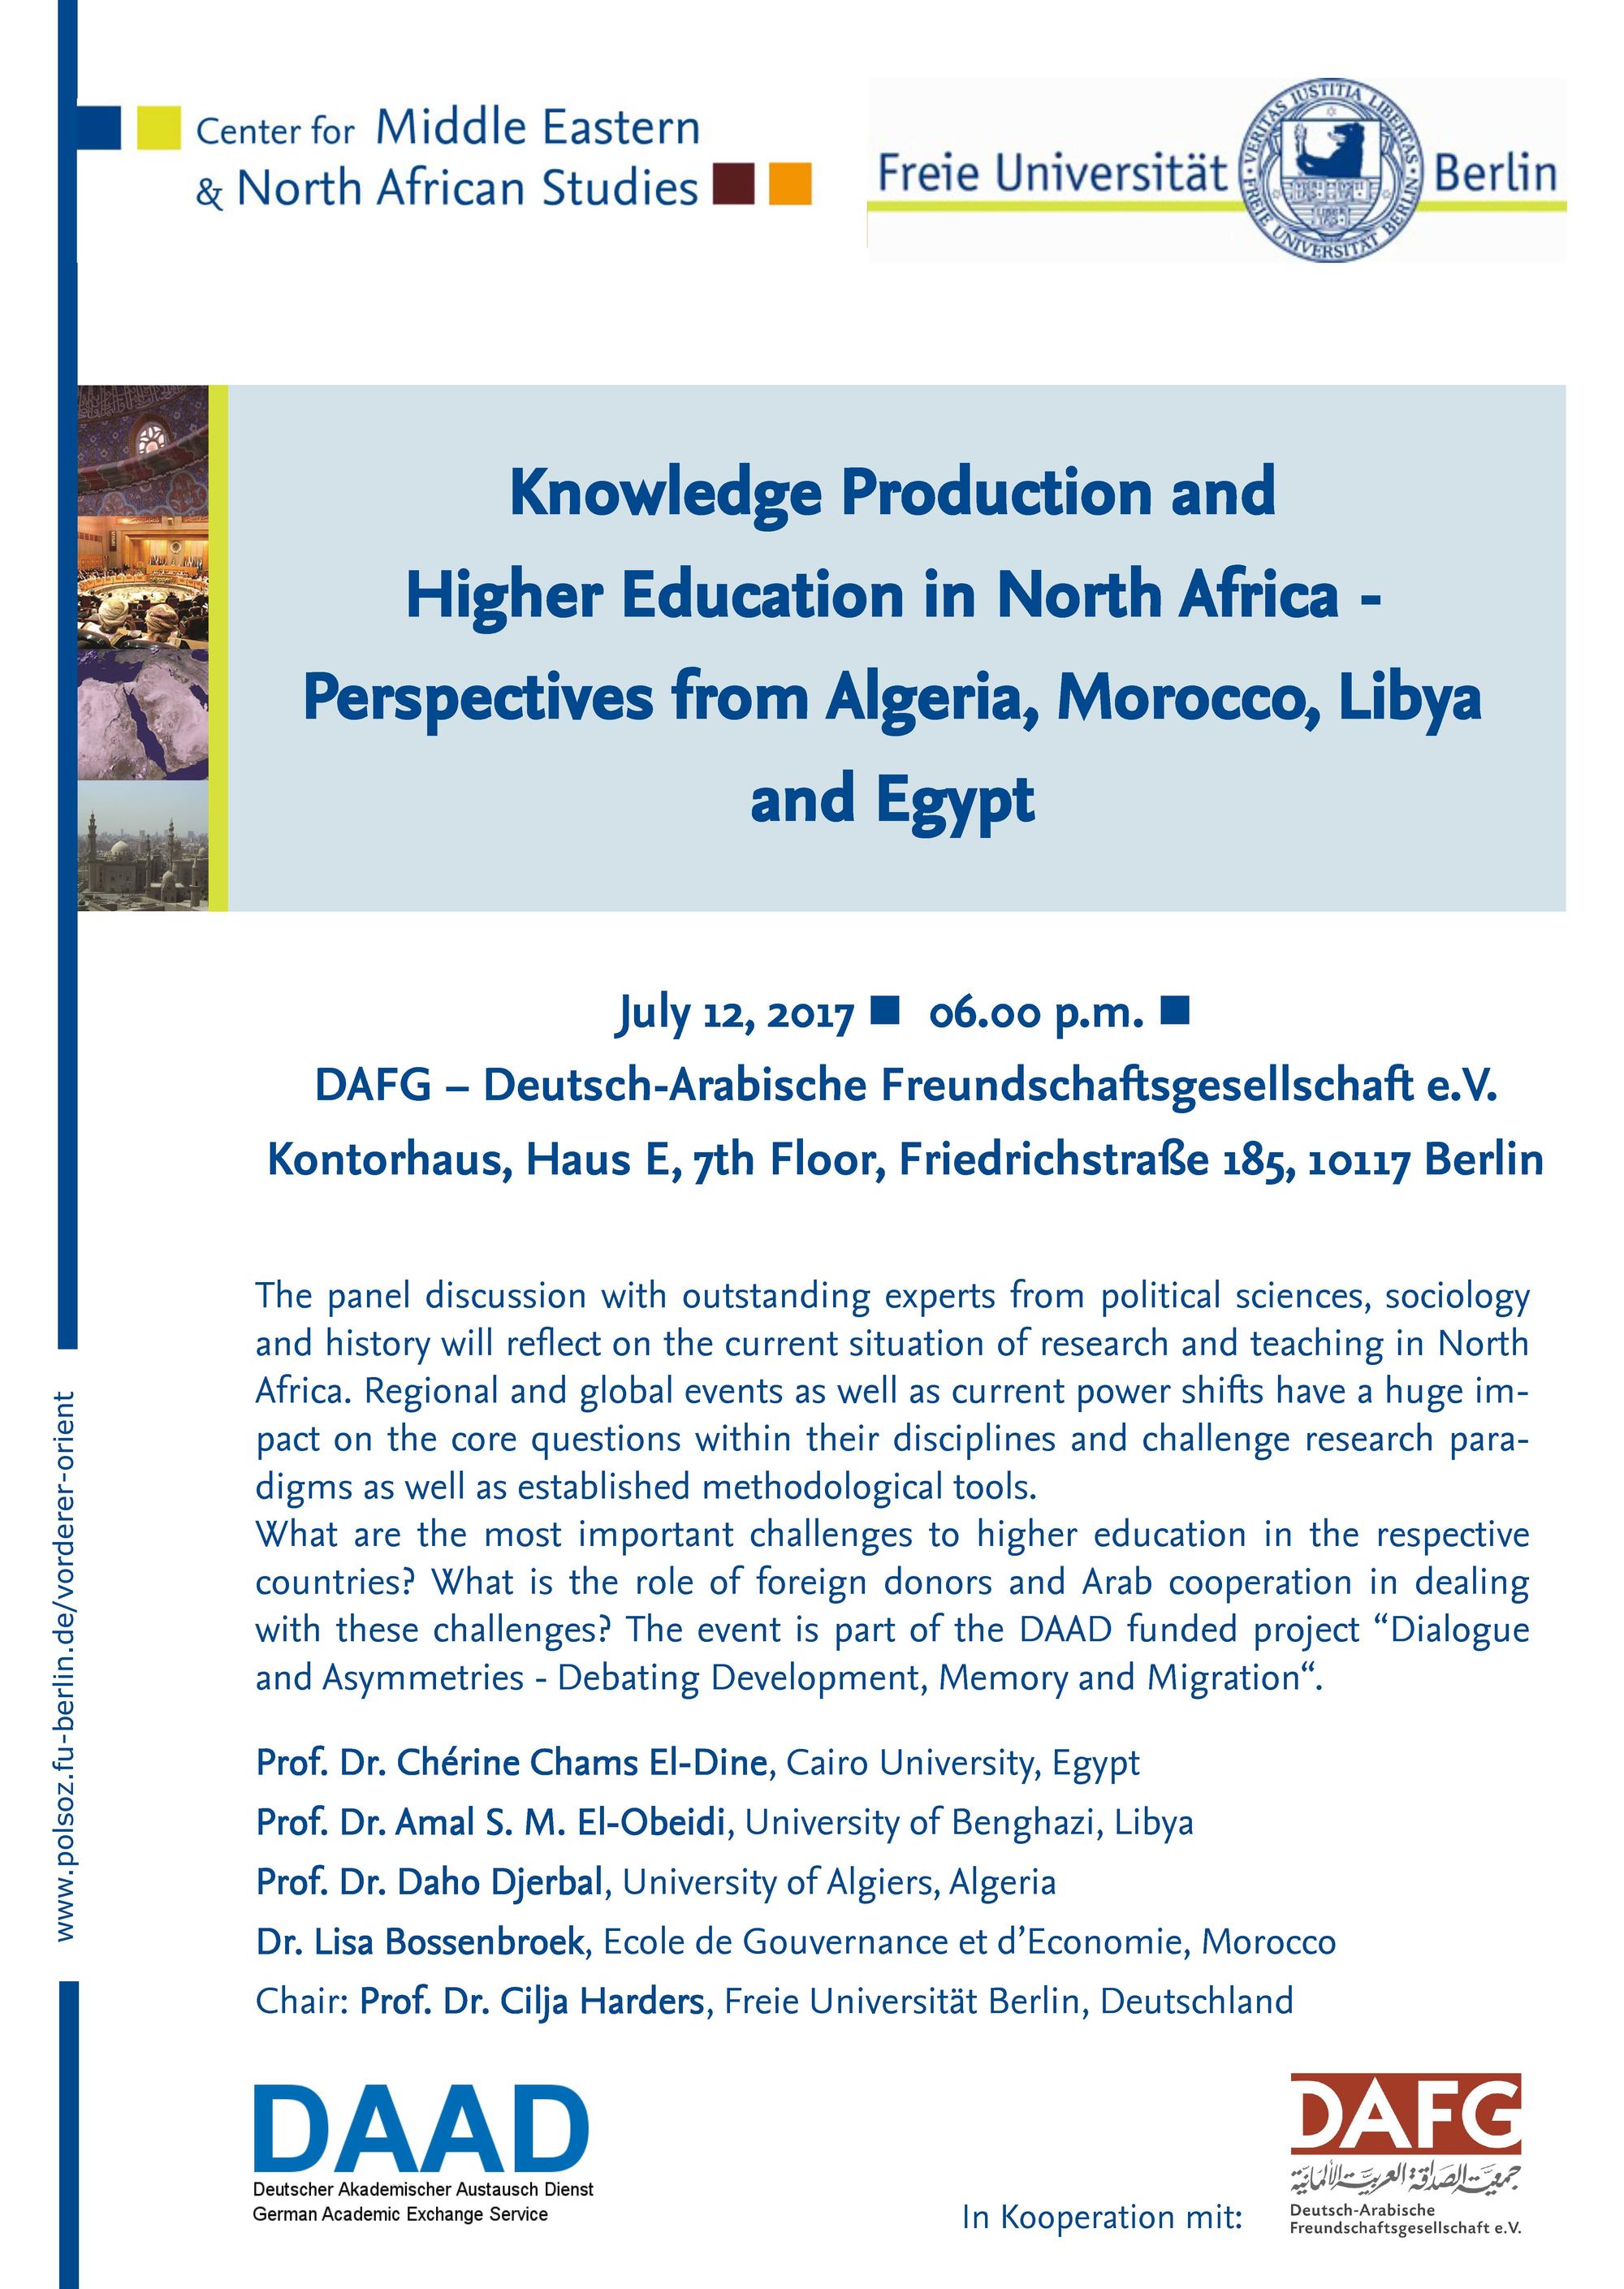 Bild: Knowledge Production in North Africa